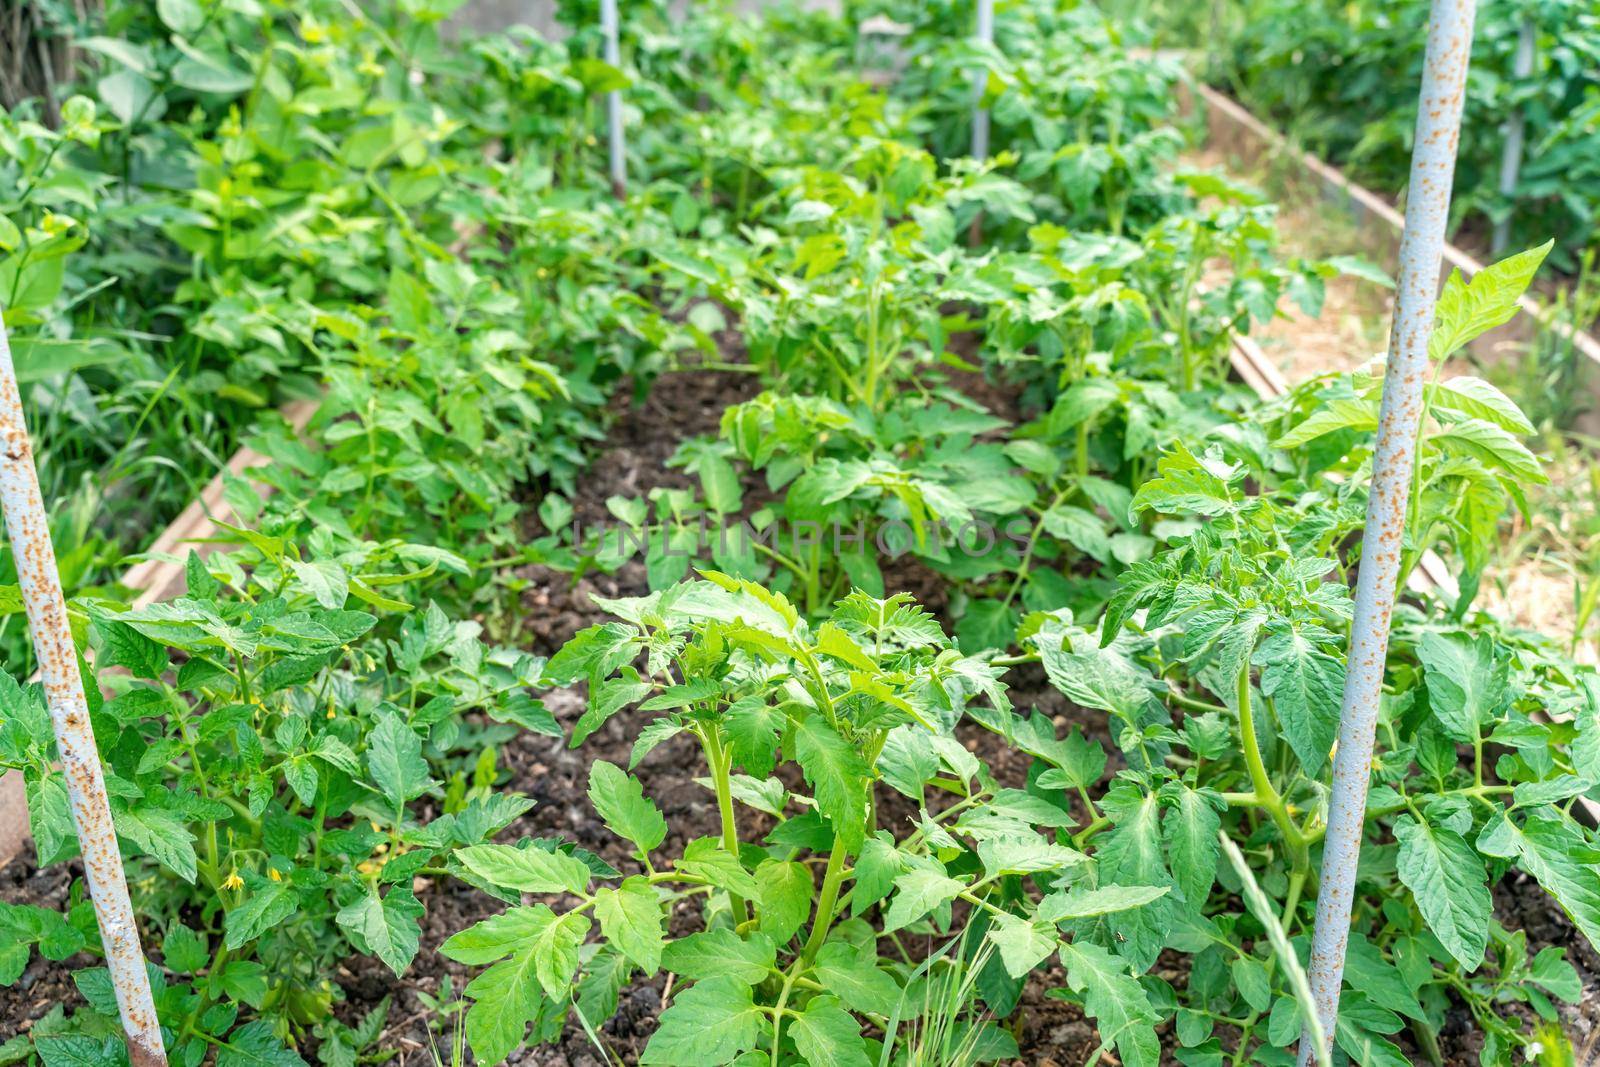 Tomato plants growing outdoors in a garden.